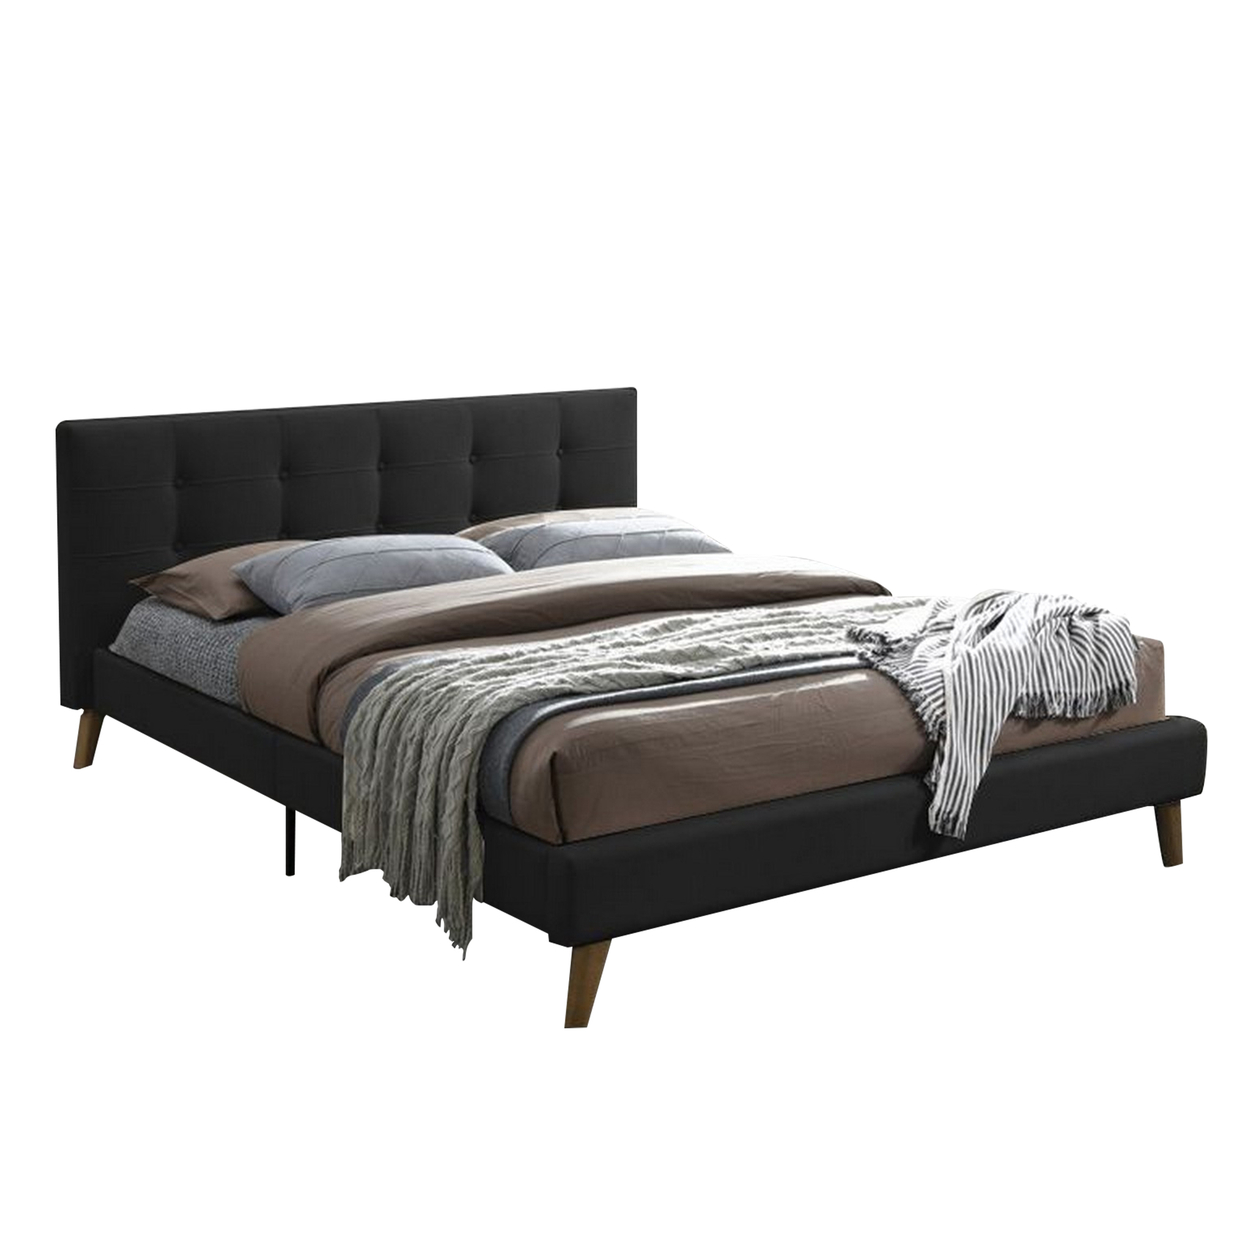 Square Tufting Fabric Queen Bed With Angled Wooden Legs, Dark Gray- Saltoro Sherpi